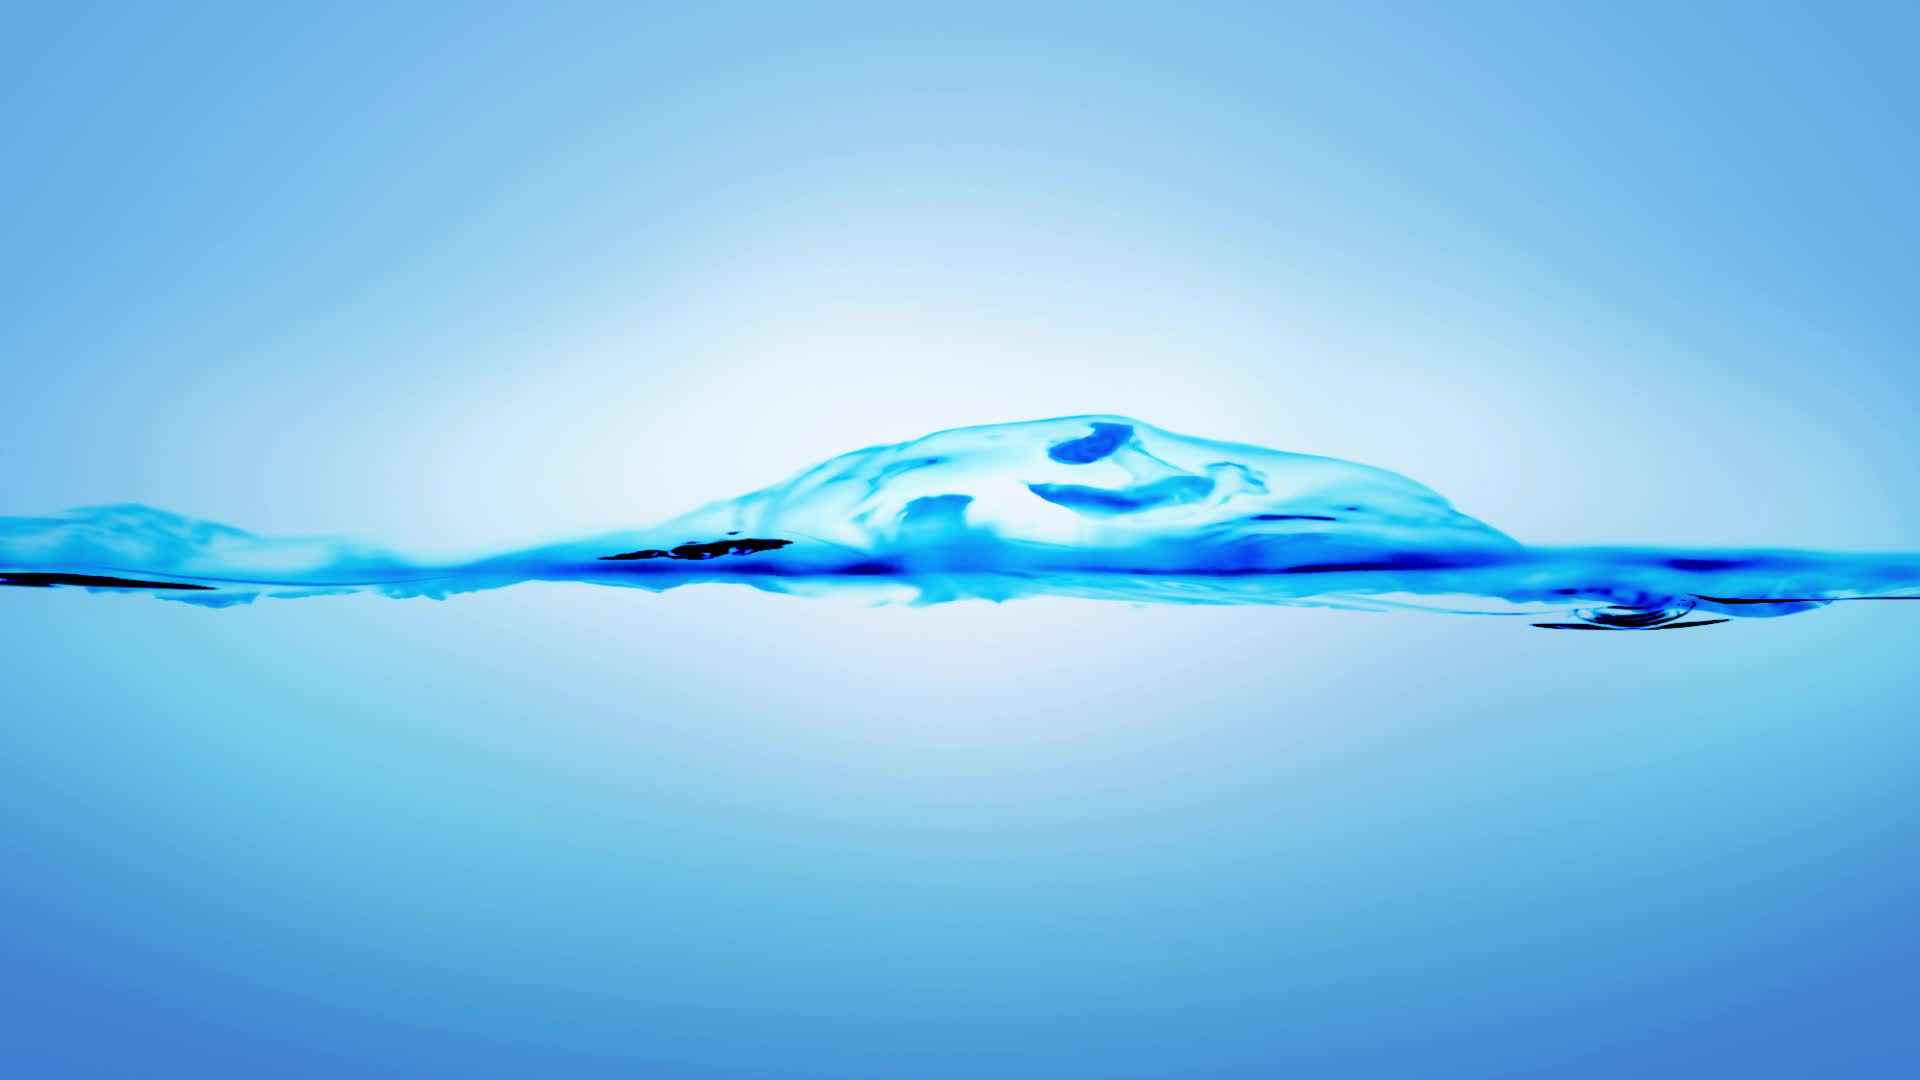 Aquafina 3D water background 1625562 Stock Video at Vecteezy